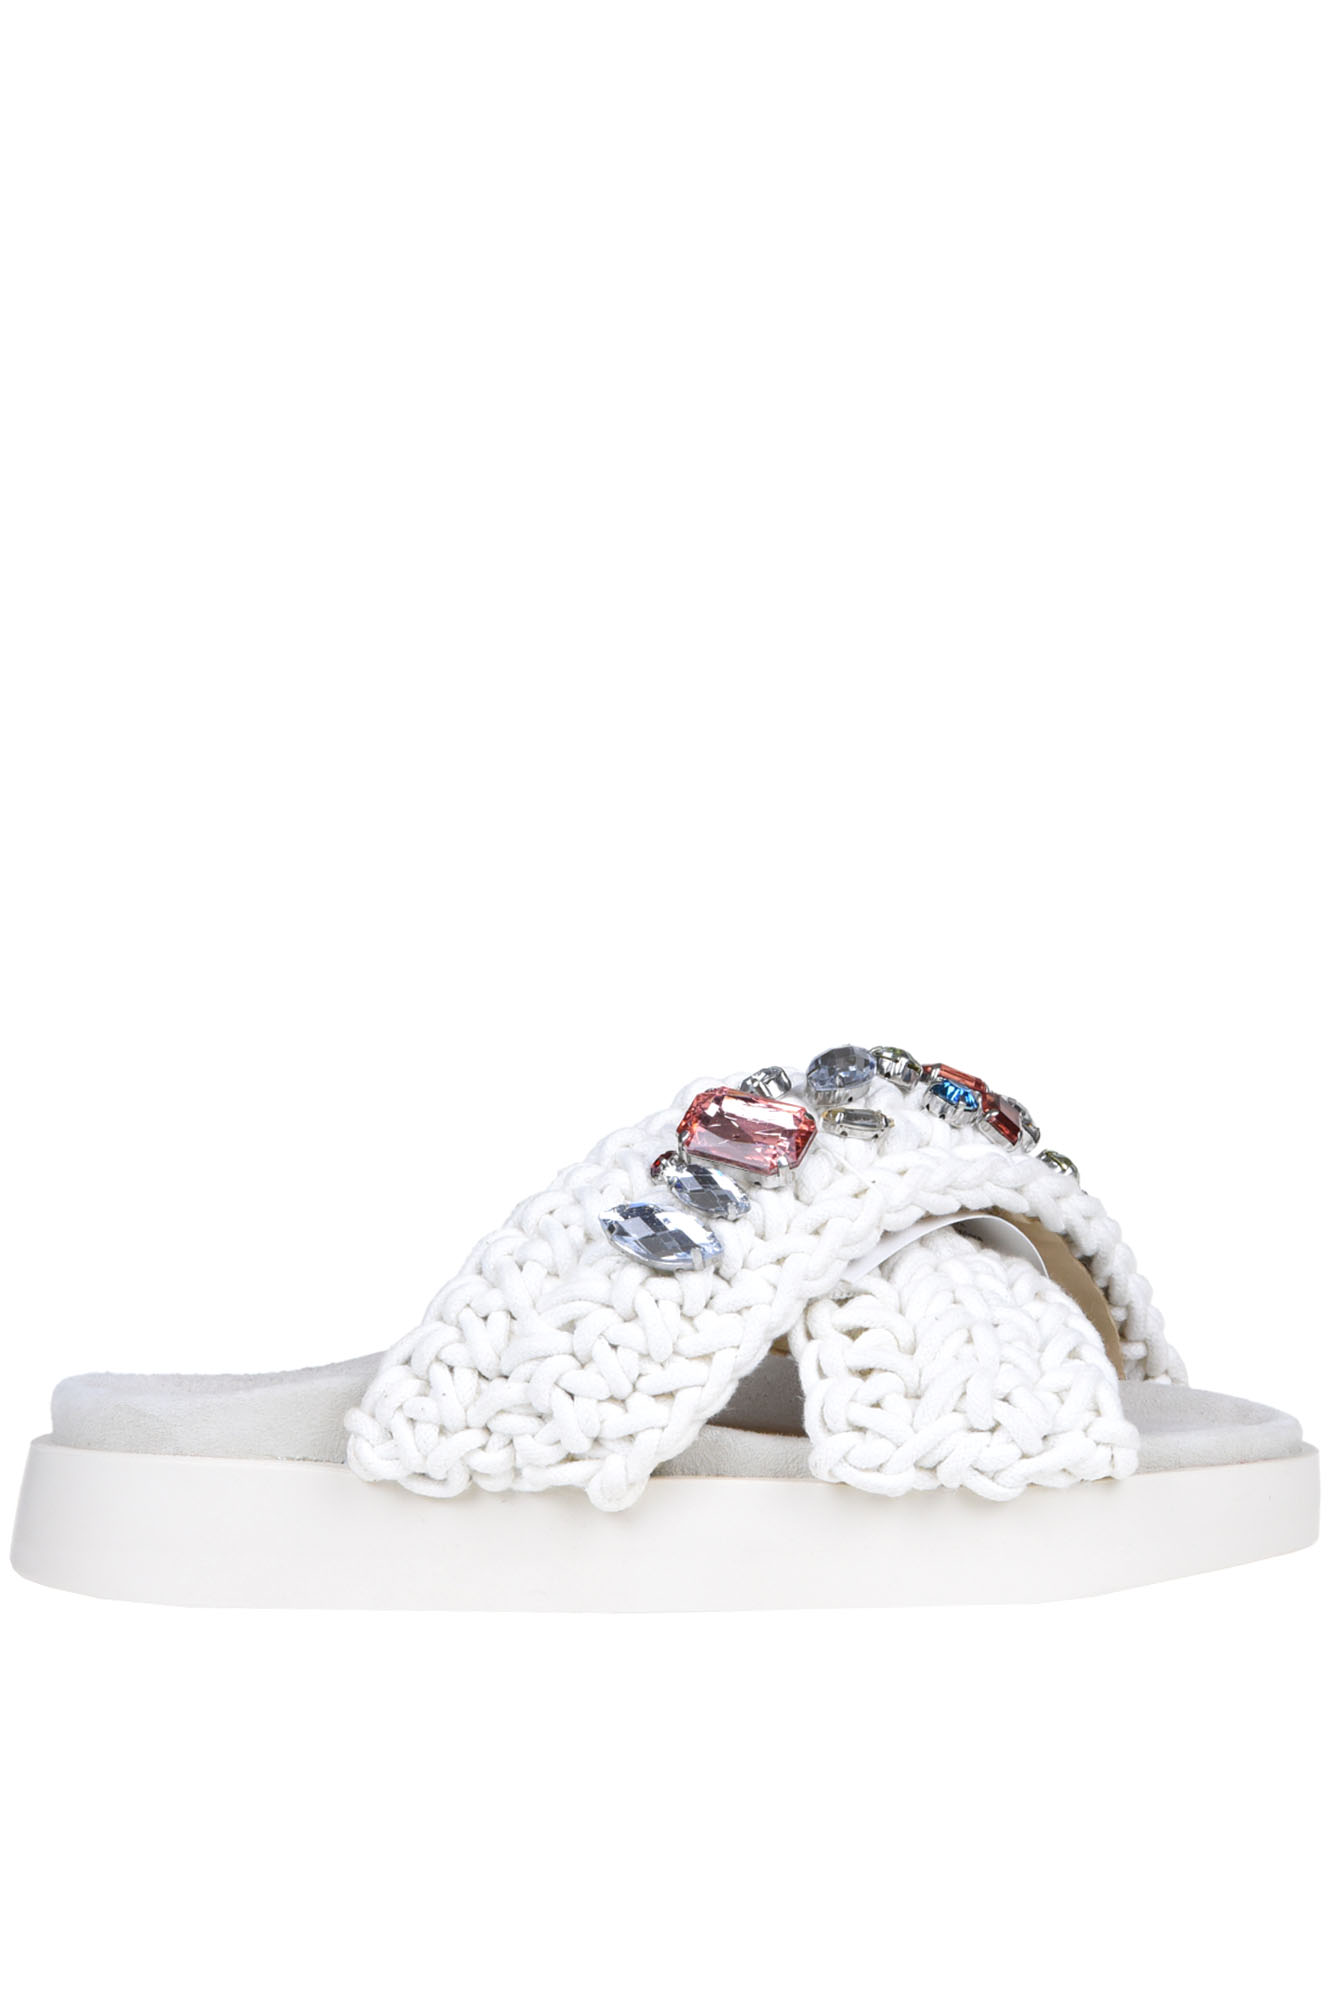 Shop Inuikii Embellished Woven Fabric Slides In White